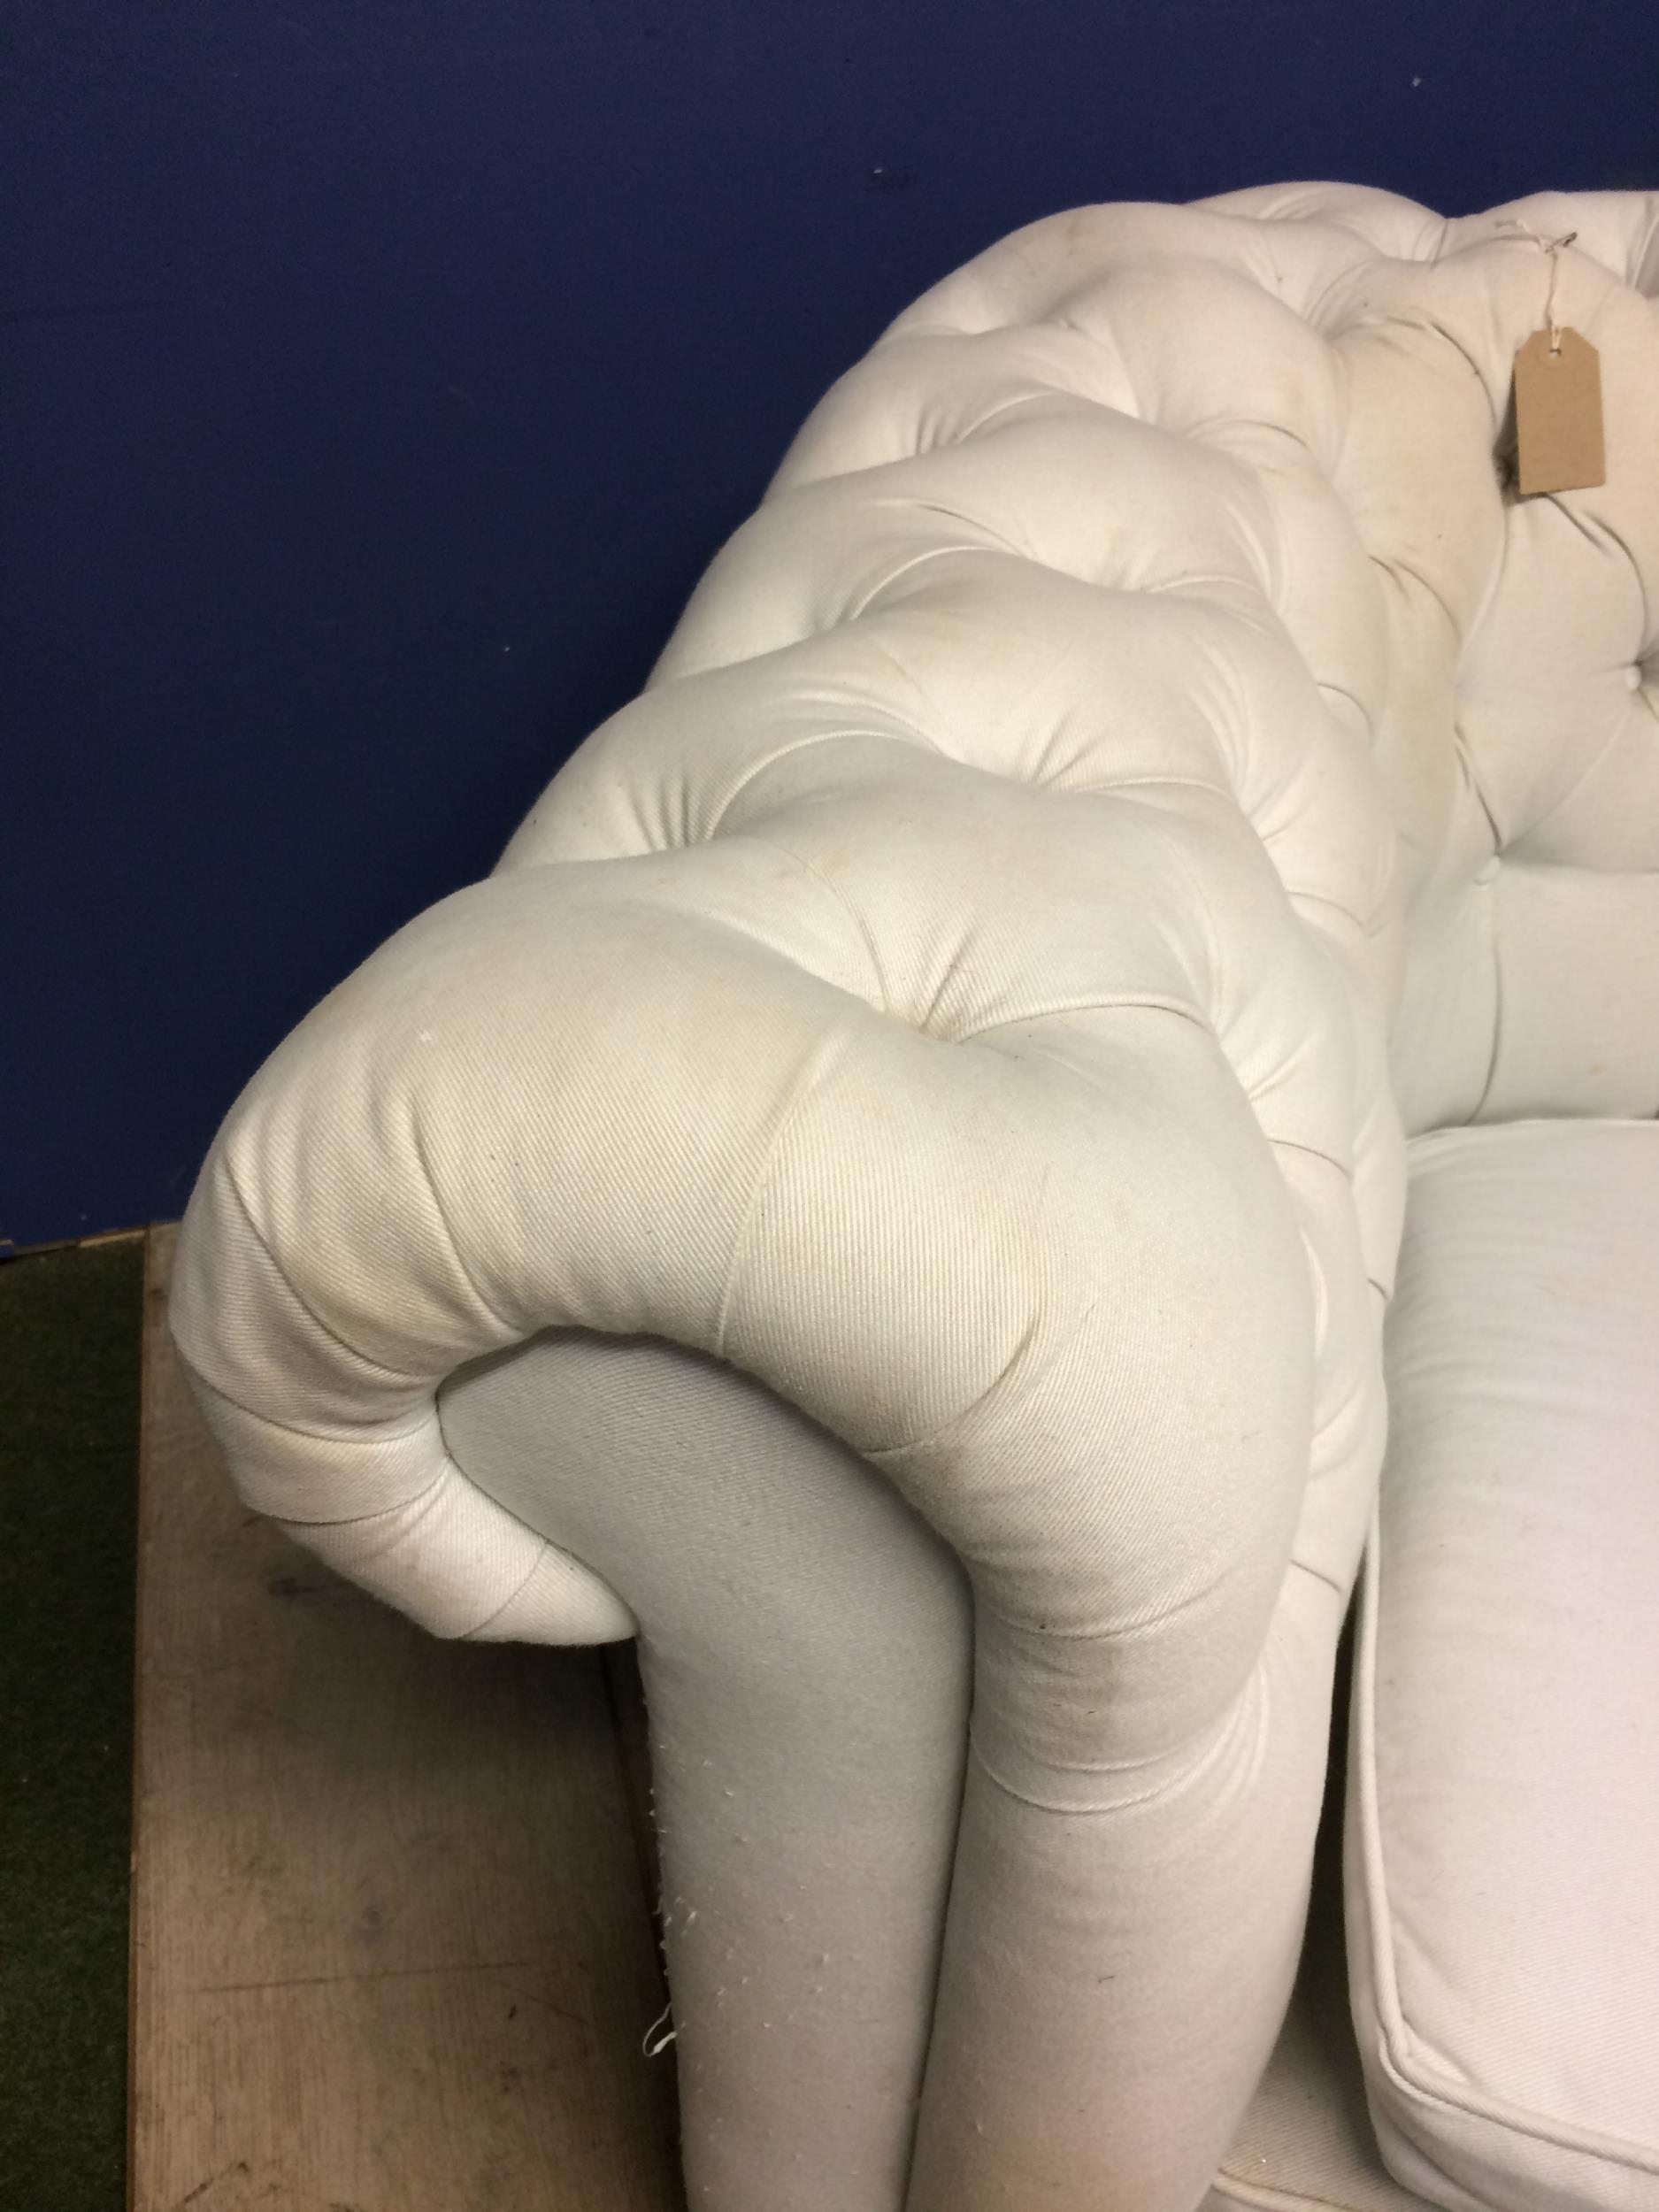 Victorian chesterfield sofa, upholstered in a light coloured fabric (some areas grubby with marks, - Image 3 of 5